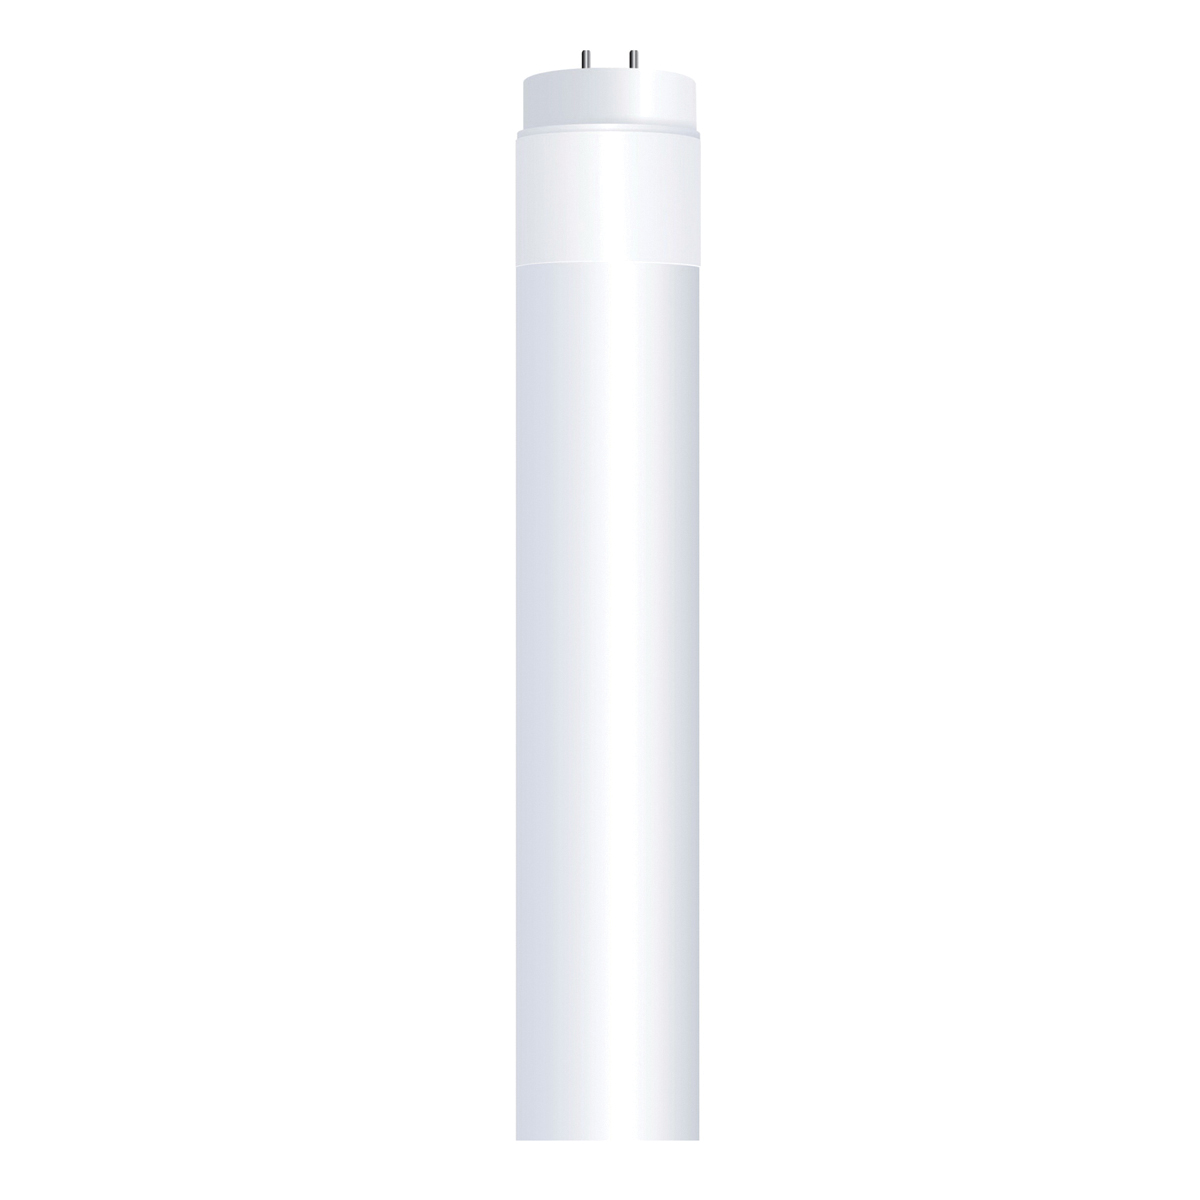 T1248/840/LEDG2/10 LED Fluorescent Tube, Linear, T12 Lamp, 40 W Equivalent, G13 Lamp Base, Frosted